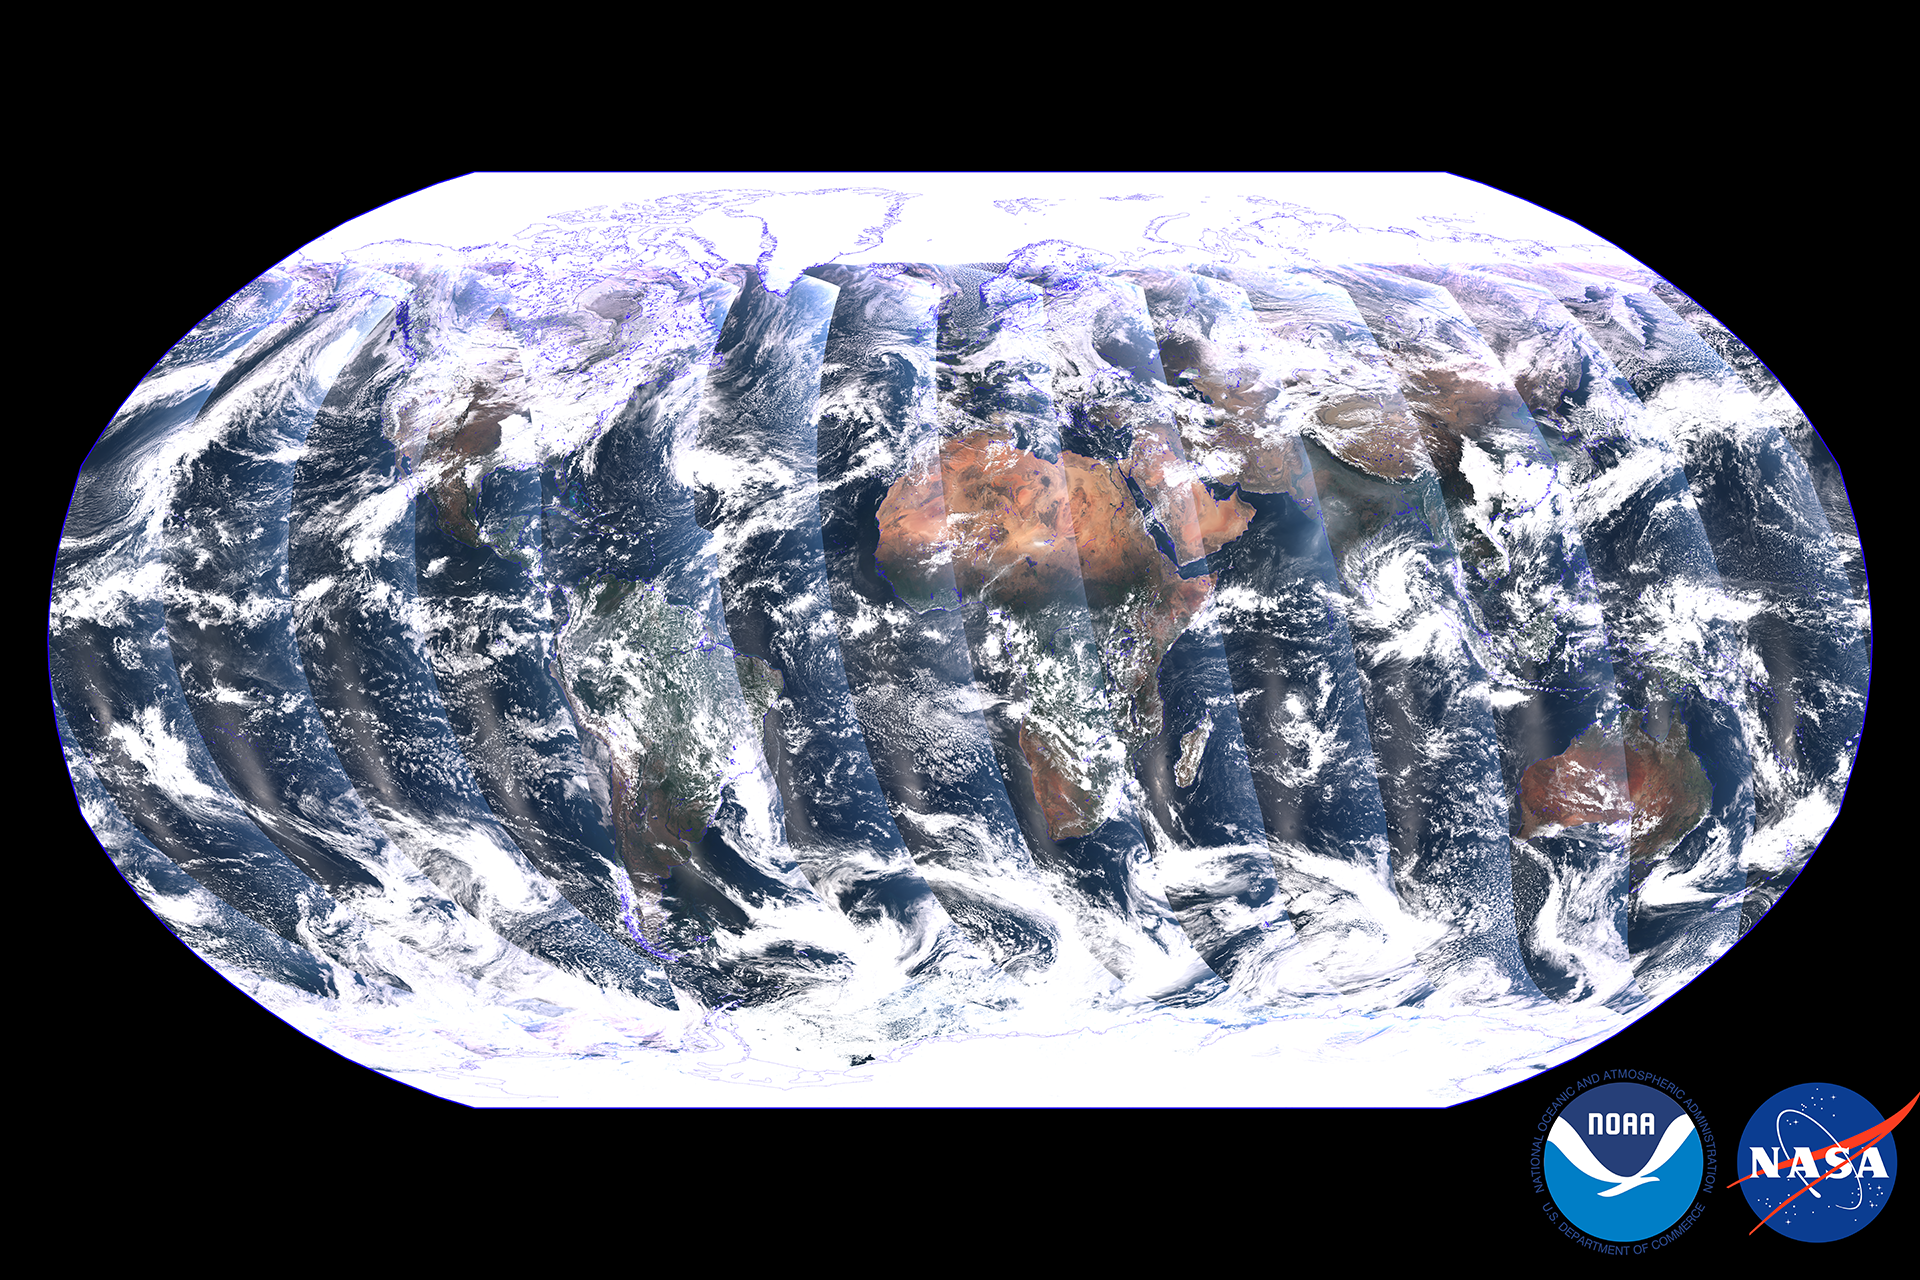 Earth looks stunning in this 1st full view from the NOAA-21 satellite (photos) thumbnail